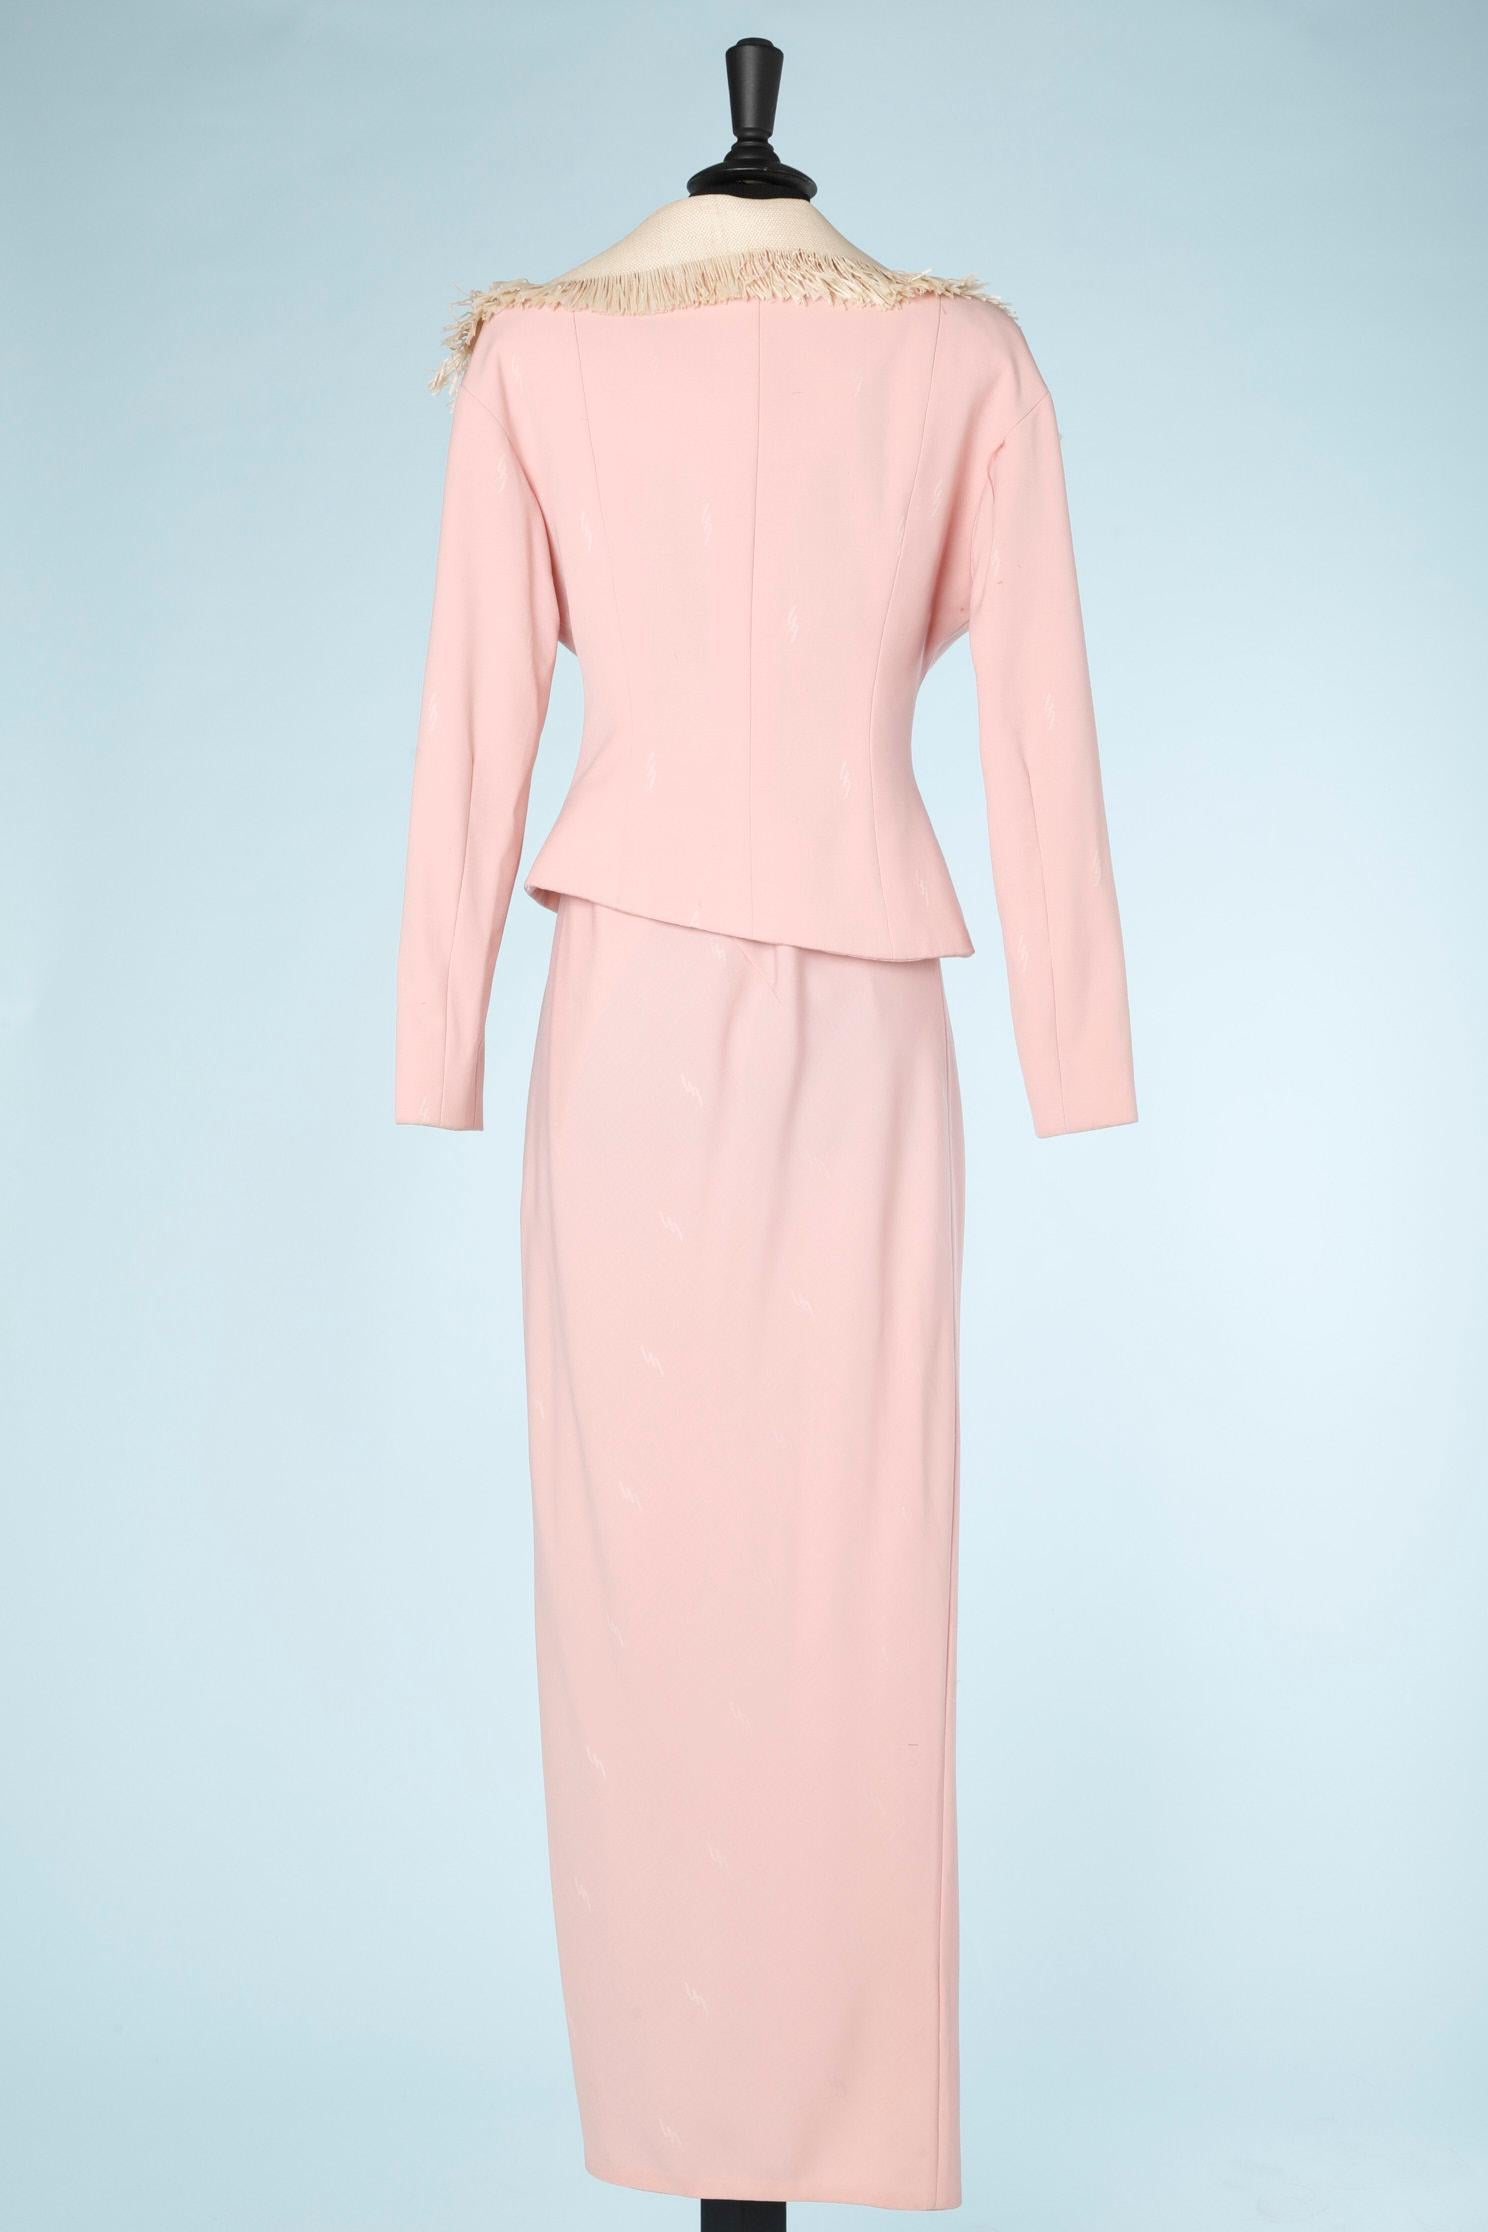 Couture pale pink skirt-suit in silk Lecoanet Hemant For Sale 1